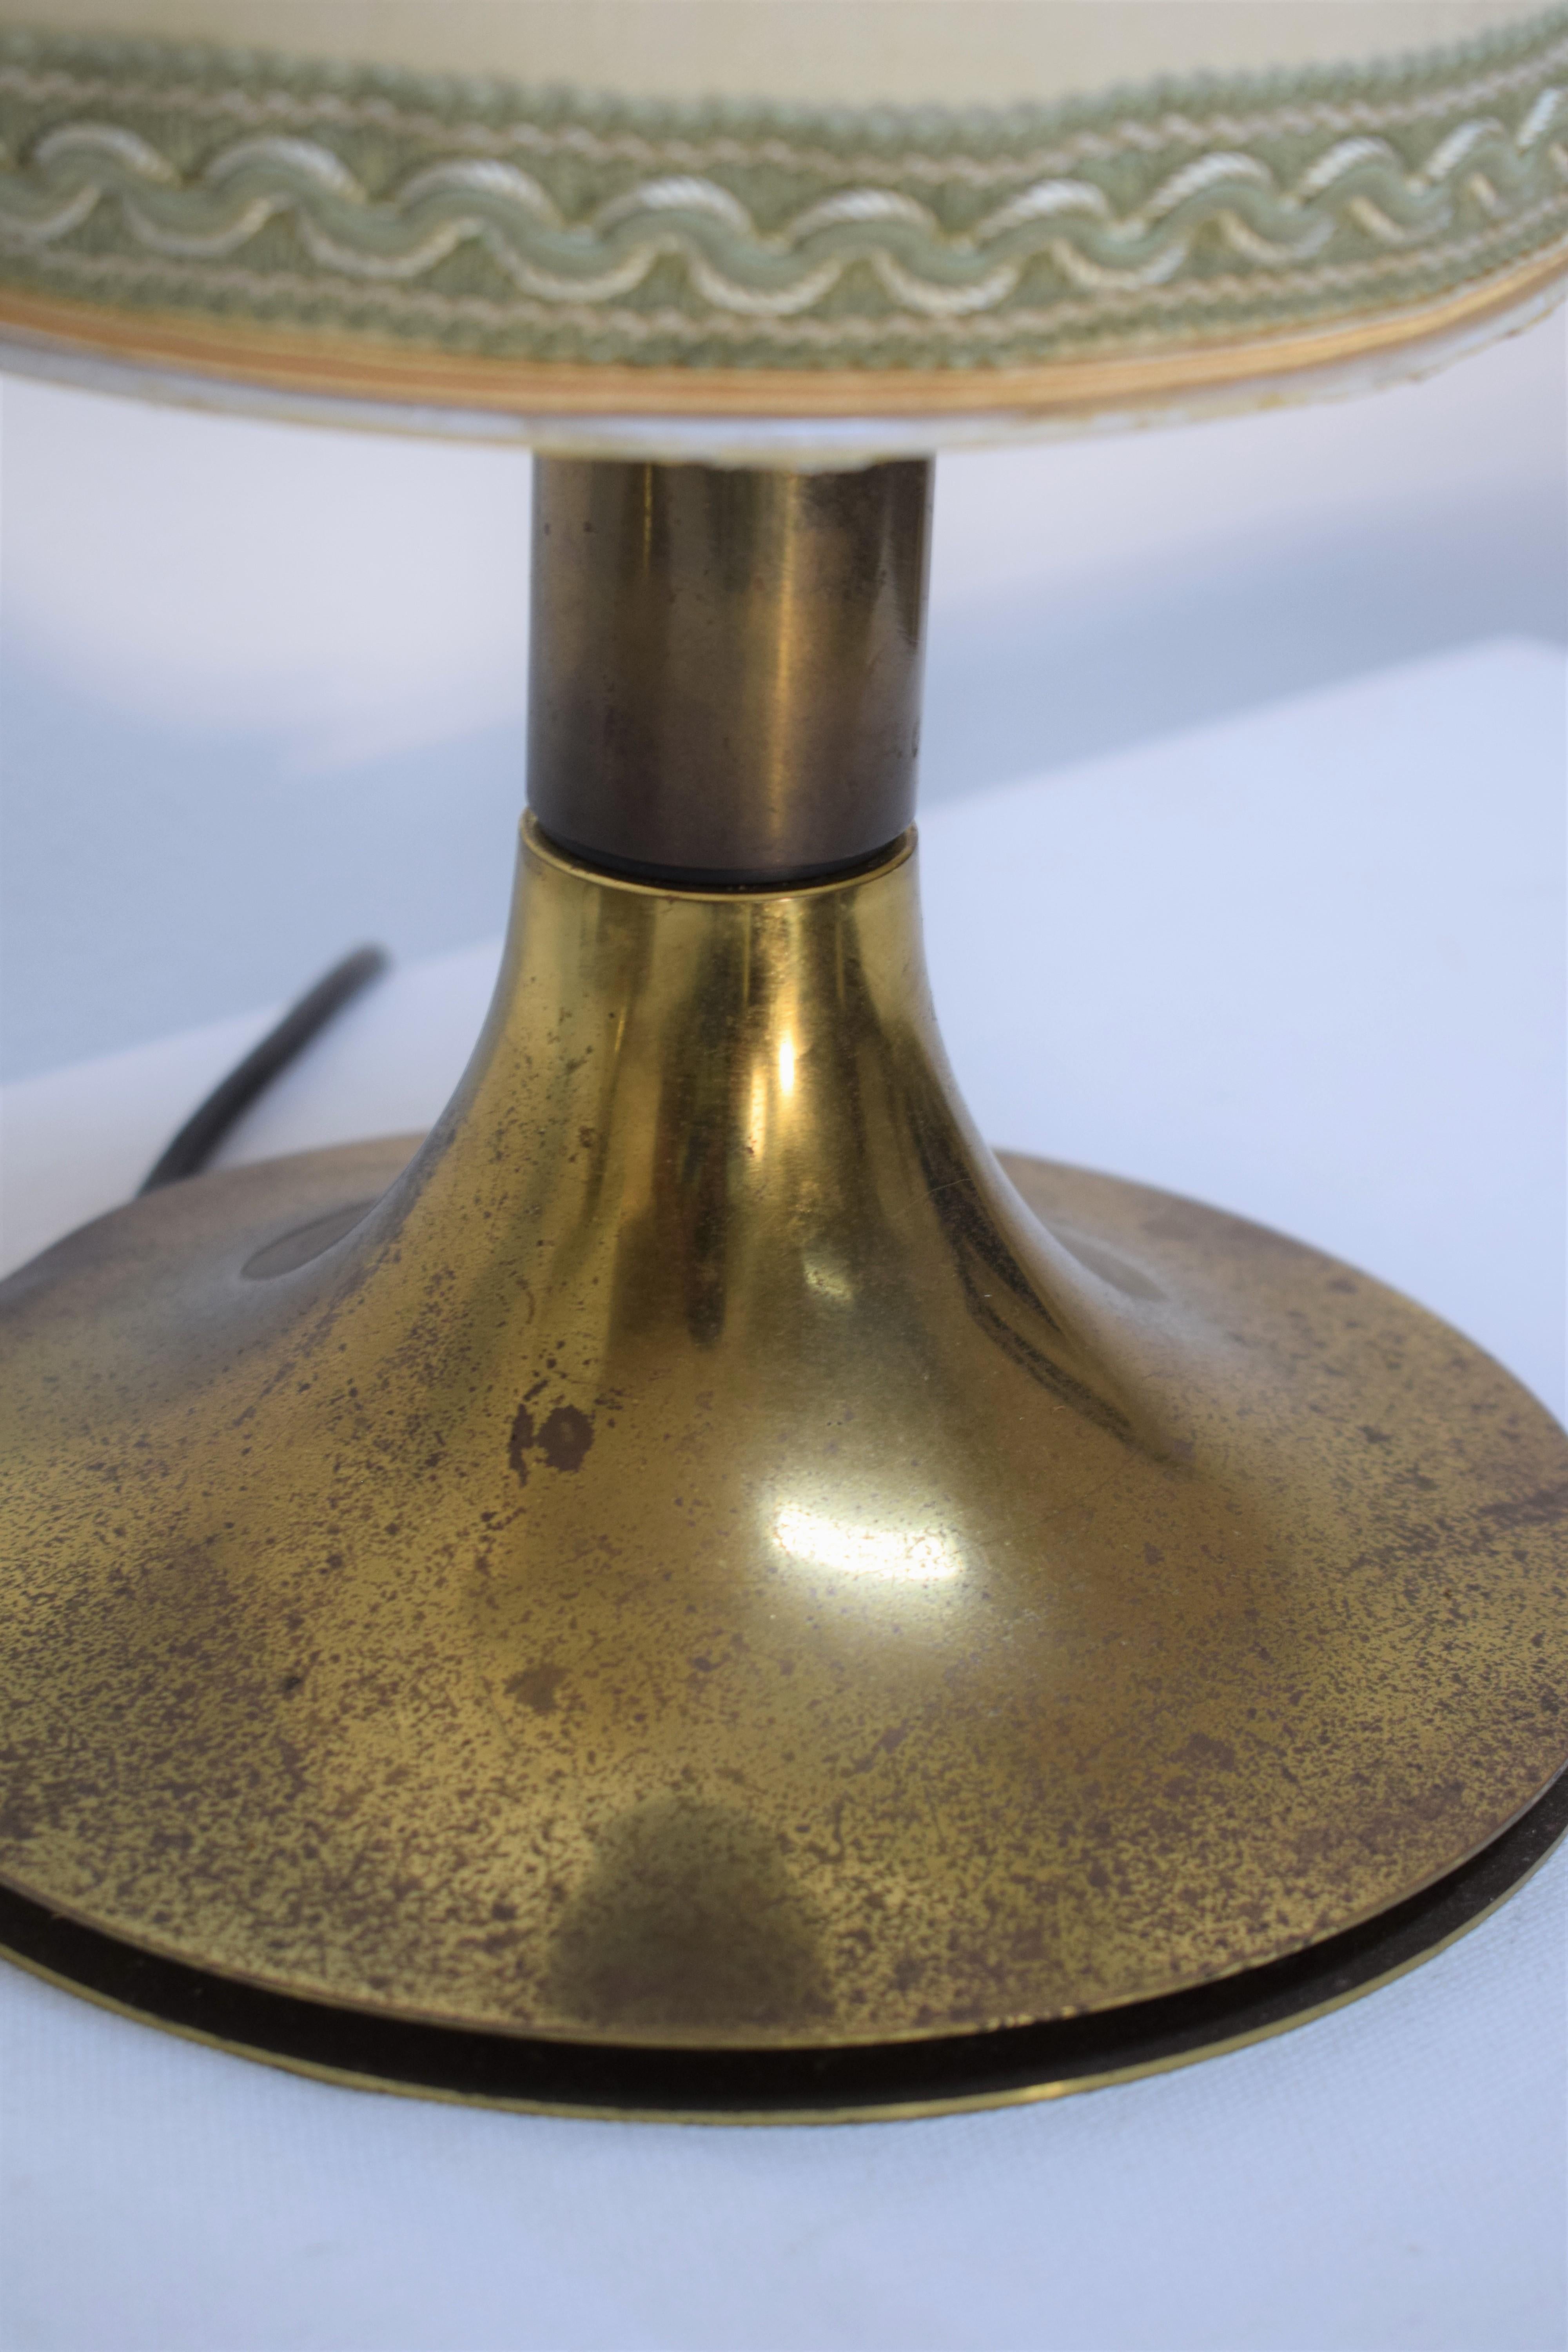 Pair of Italian brass table lamps, 1960s.
Dimensions: H= 35cm; D= 20 cm.